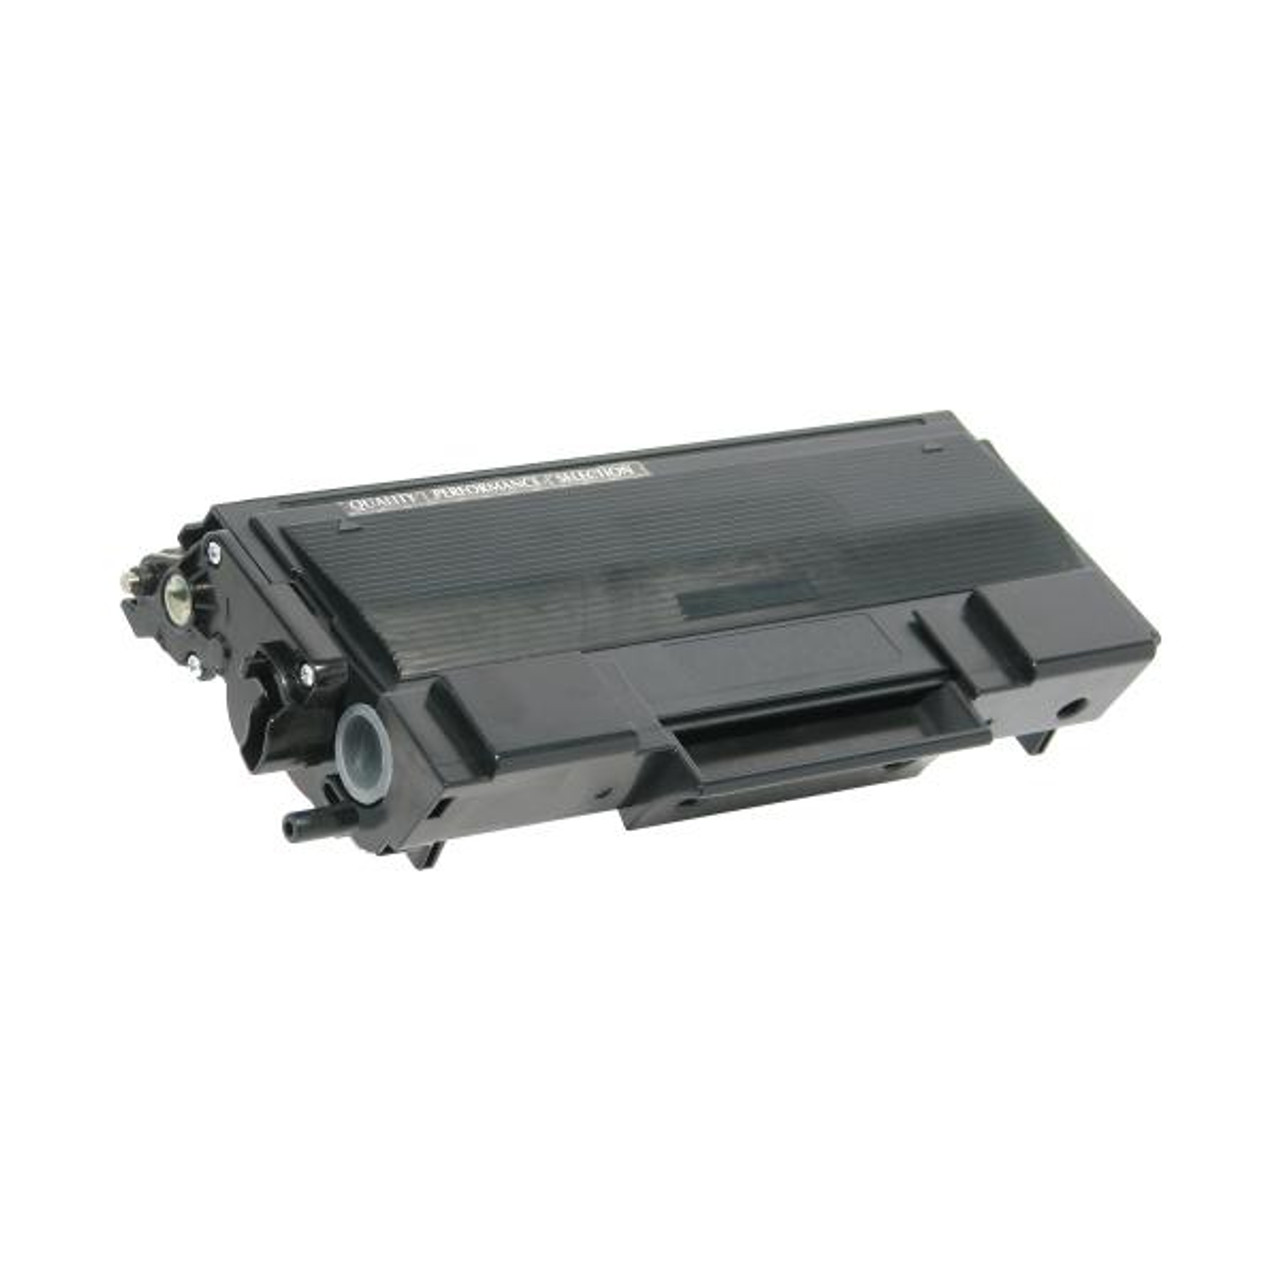 Toner Cartridge for Brother TN620-1